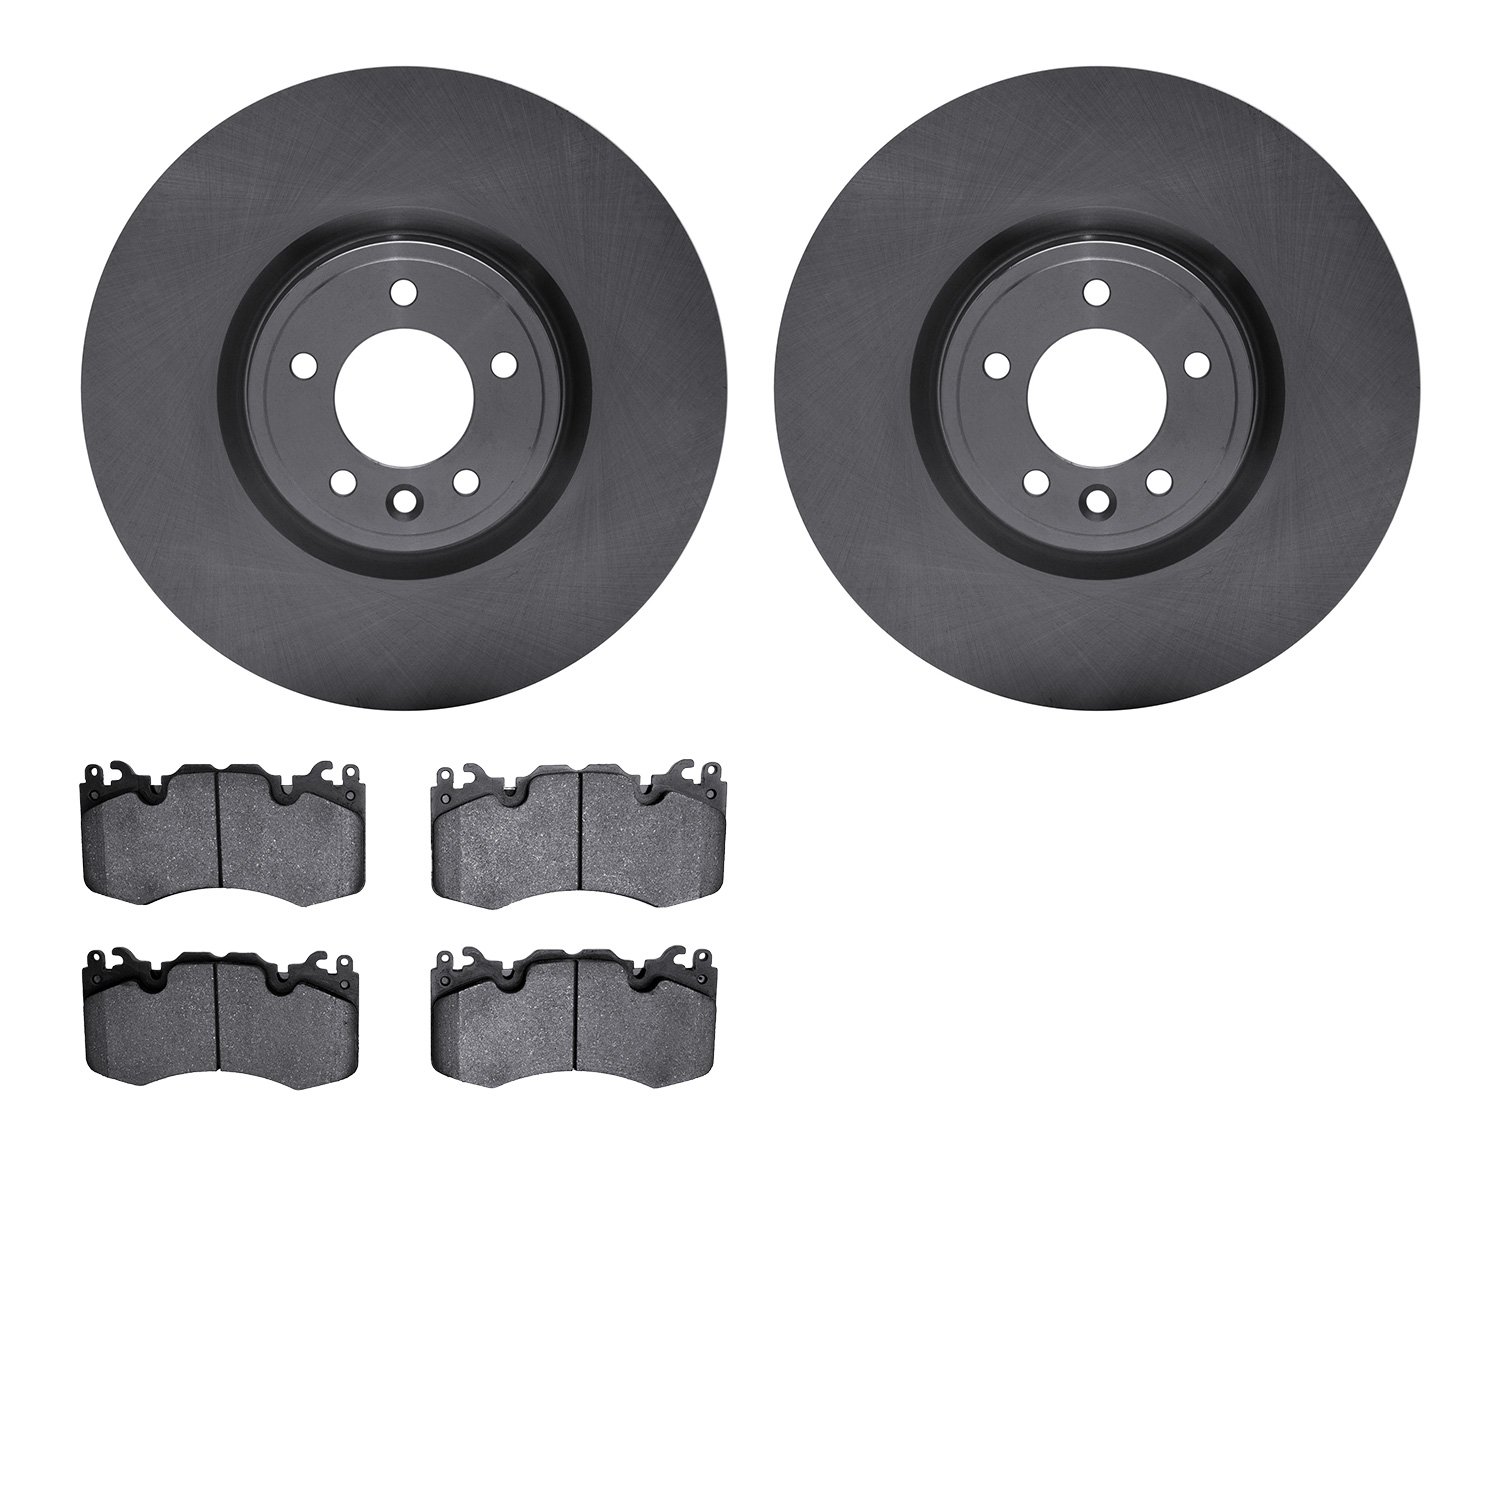 6502-11178 Brake Rotors w/5000 Advanced Brake Pads Kit, Fits Select Land Rover, Position: Front